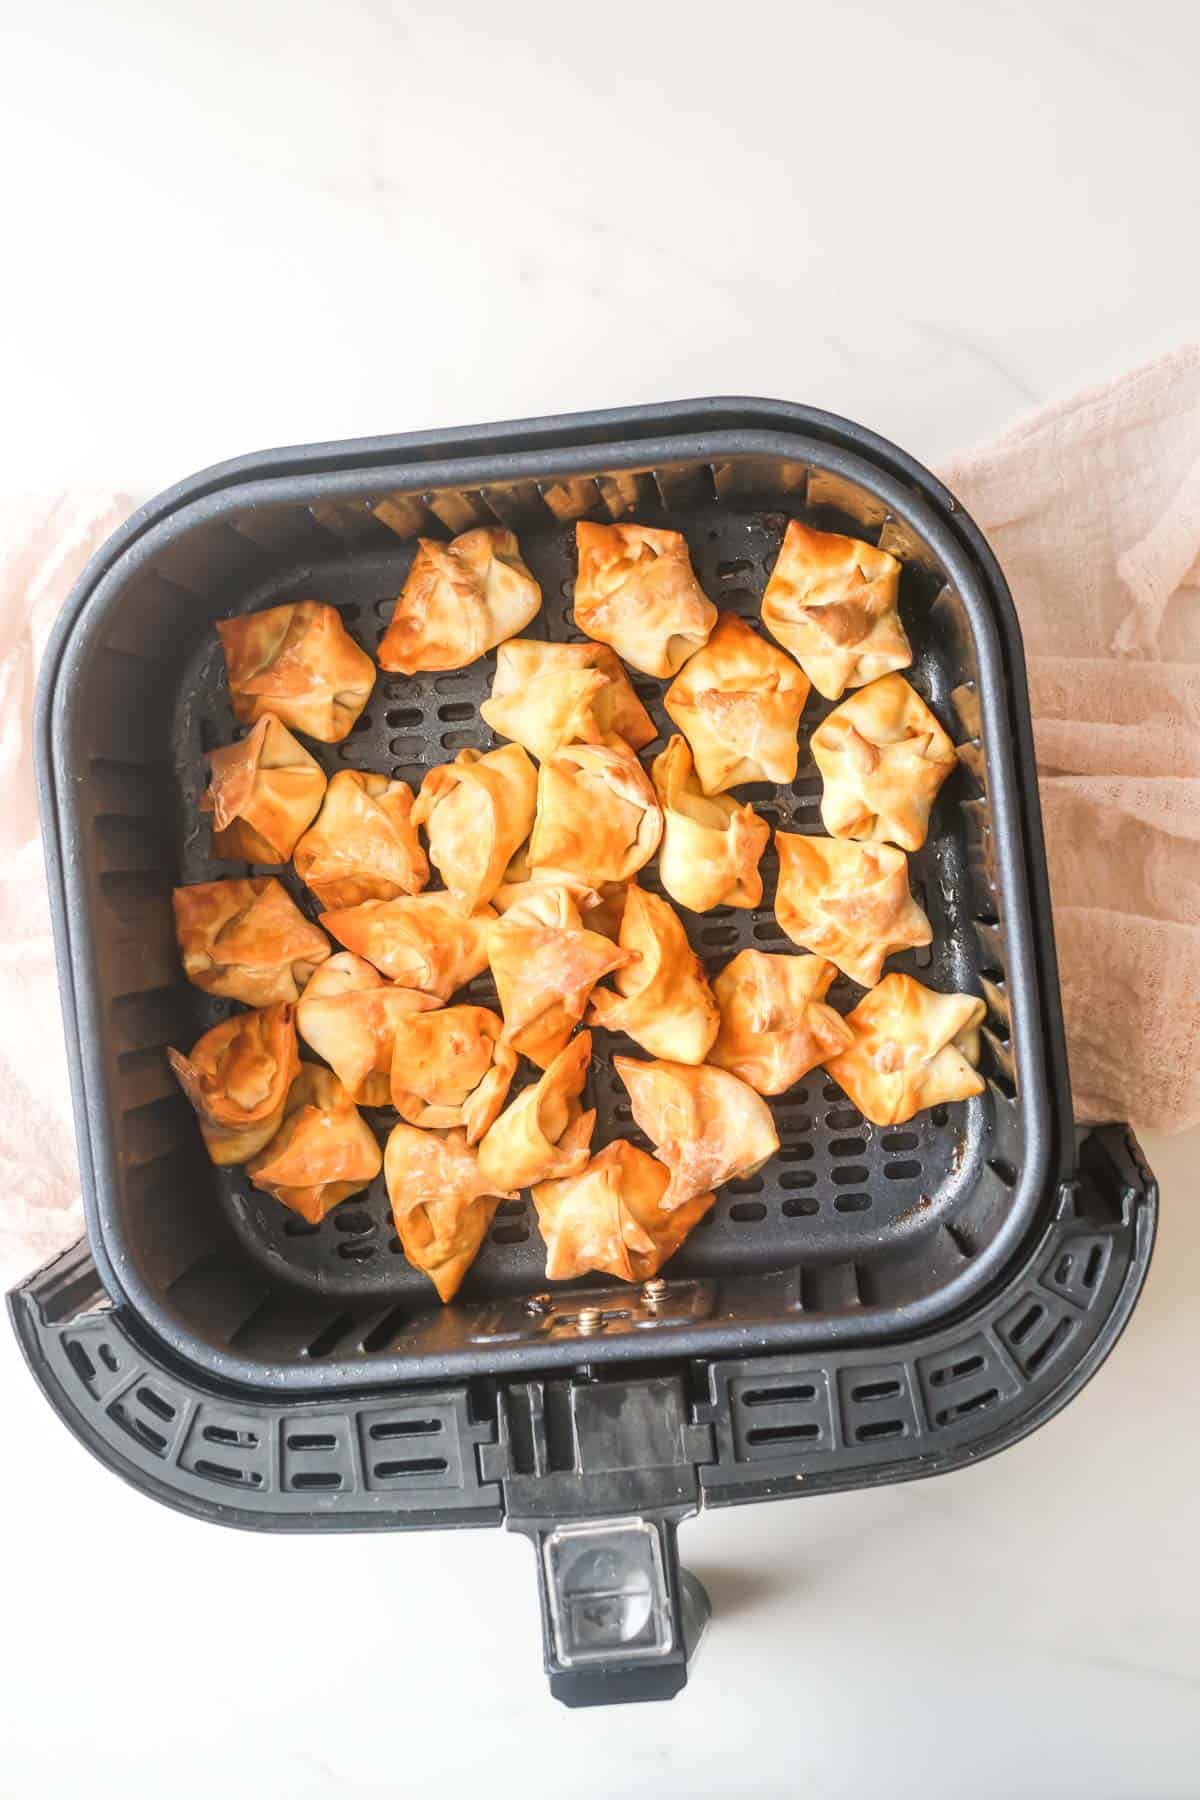 cooked wontons inside the air fryer basket